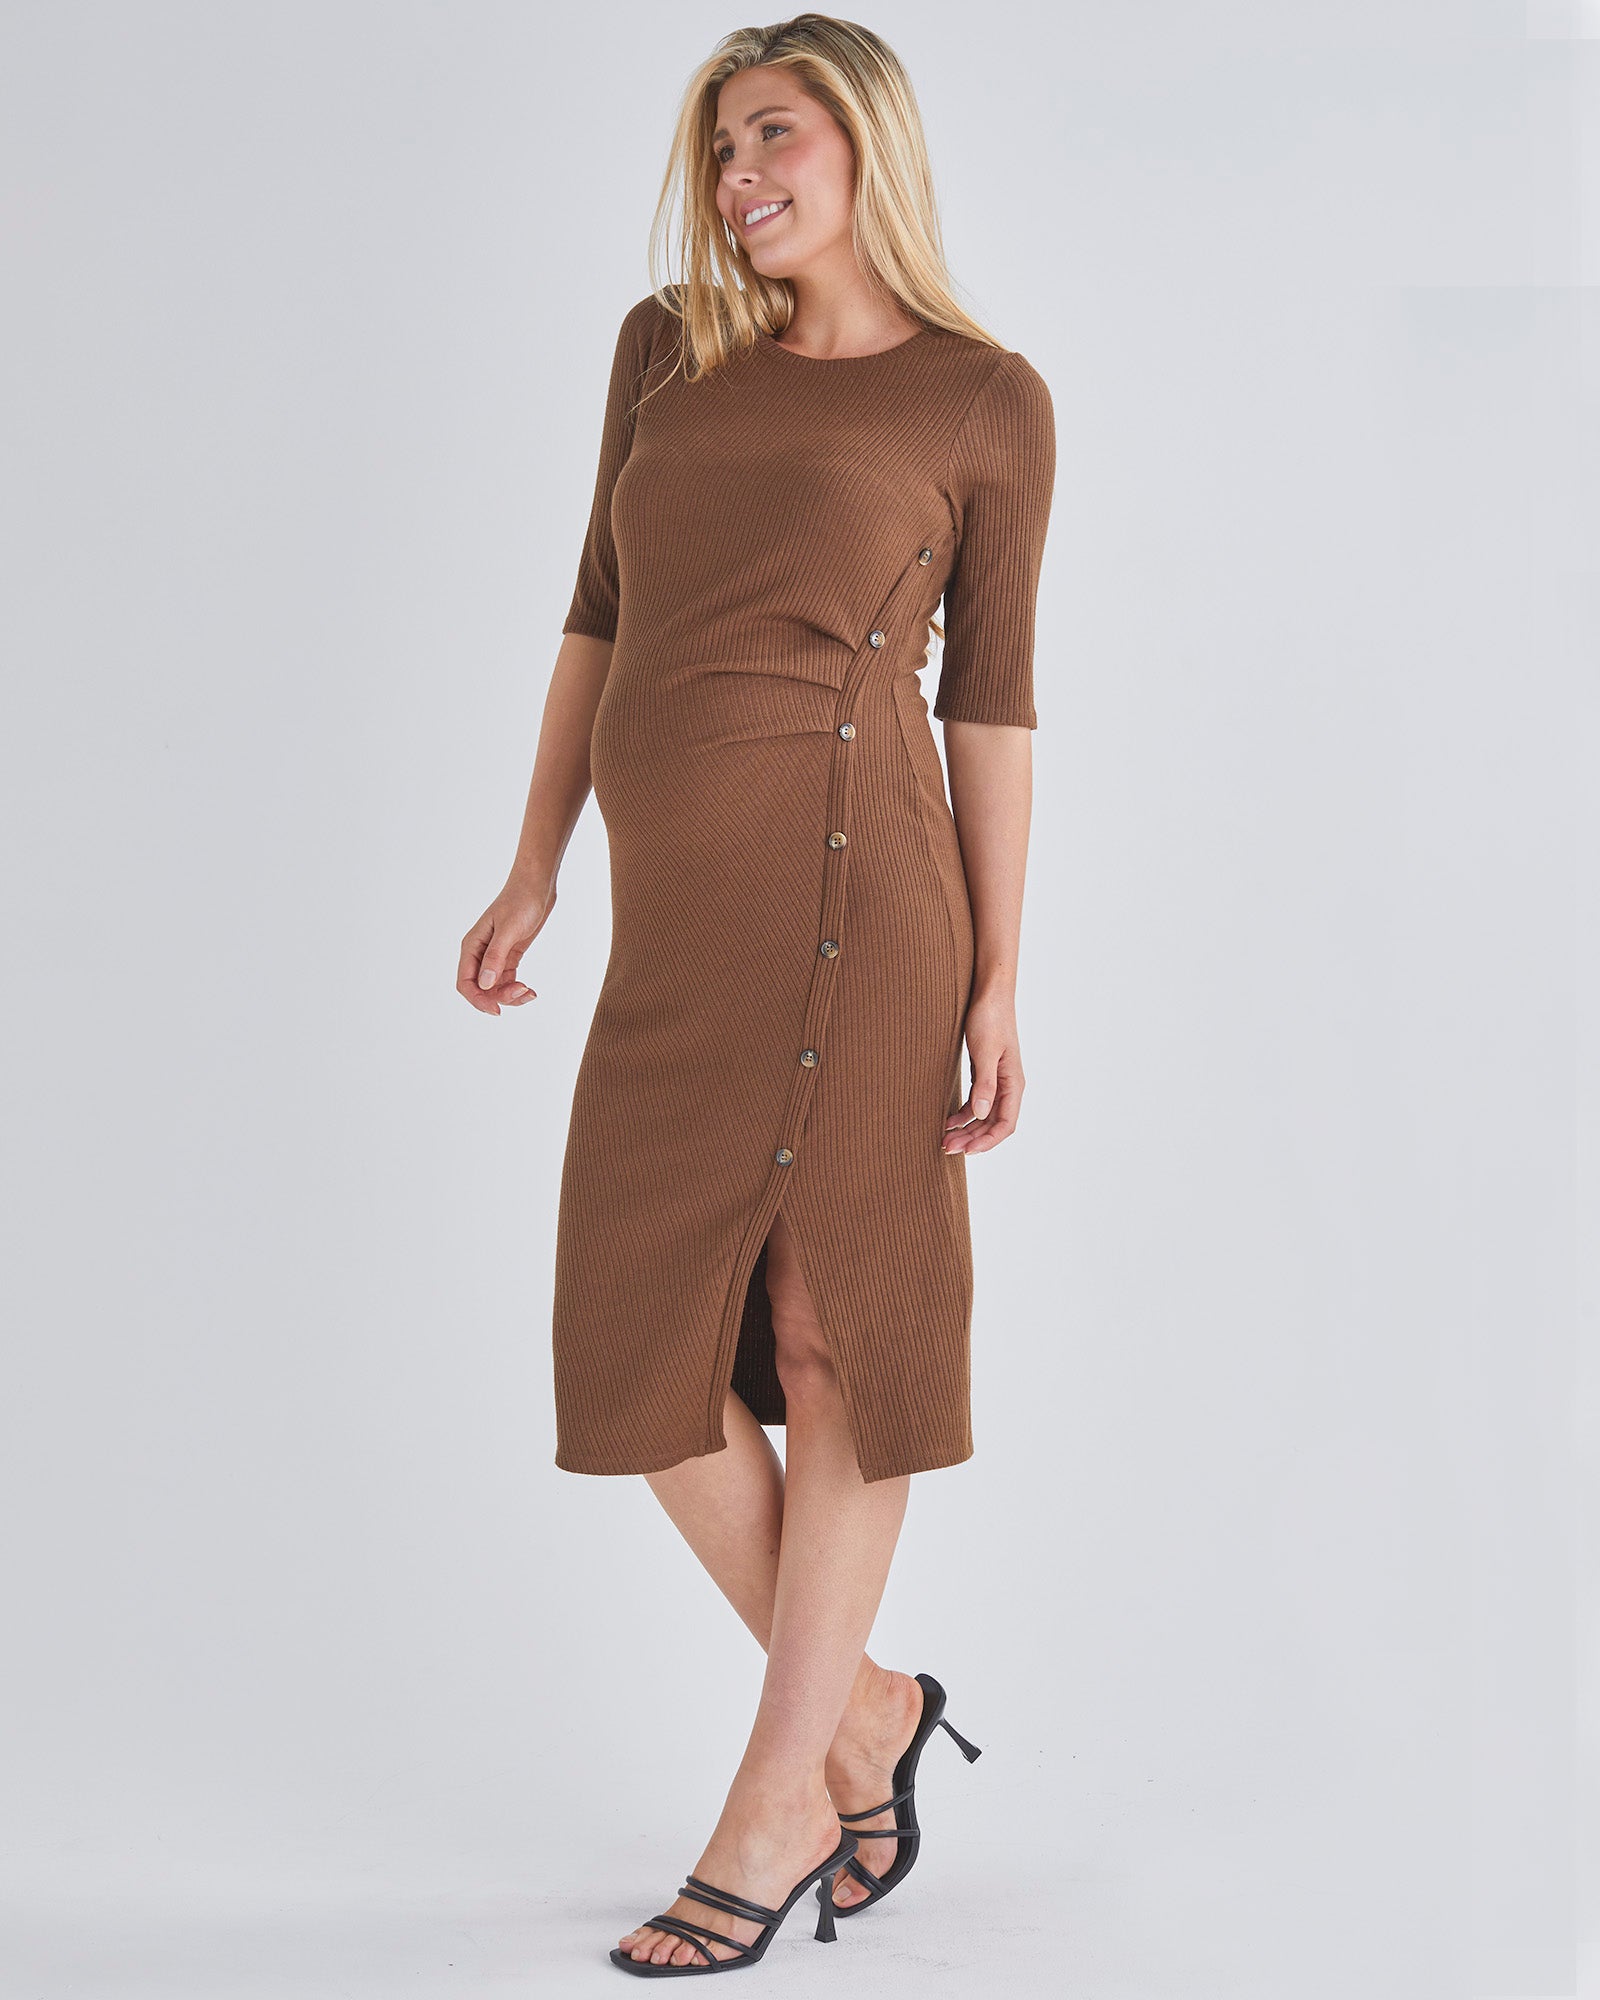 A Pregnant Woman Maternity Elegance Bodycon Dress in Brown